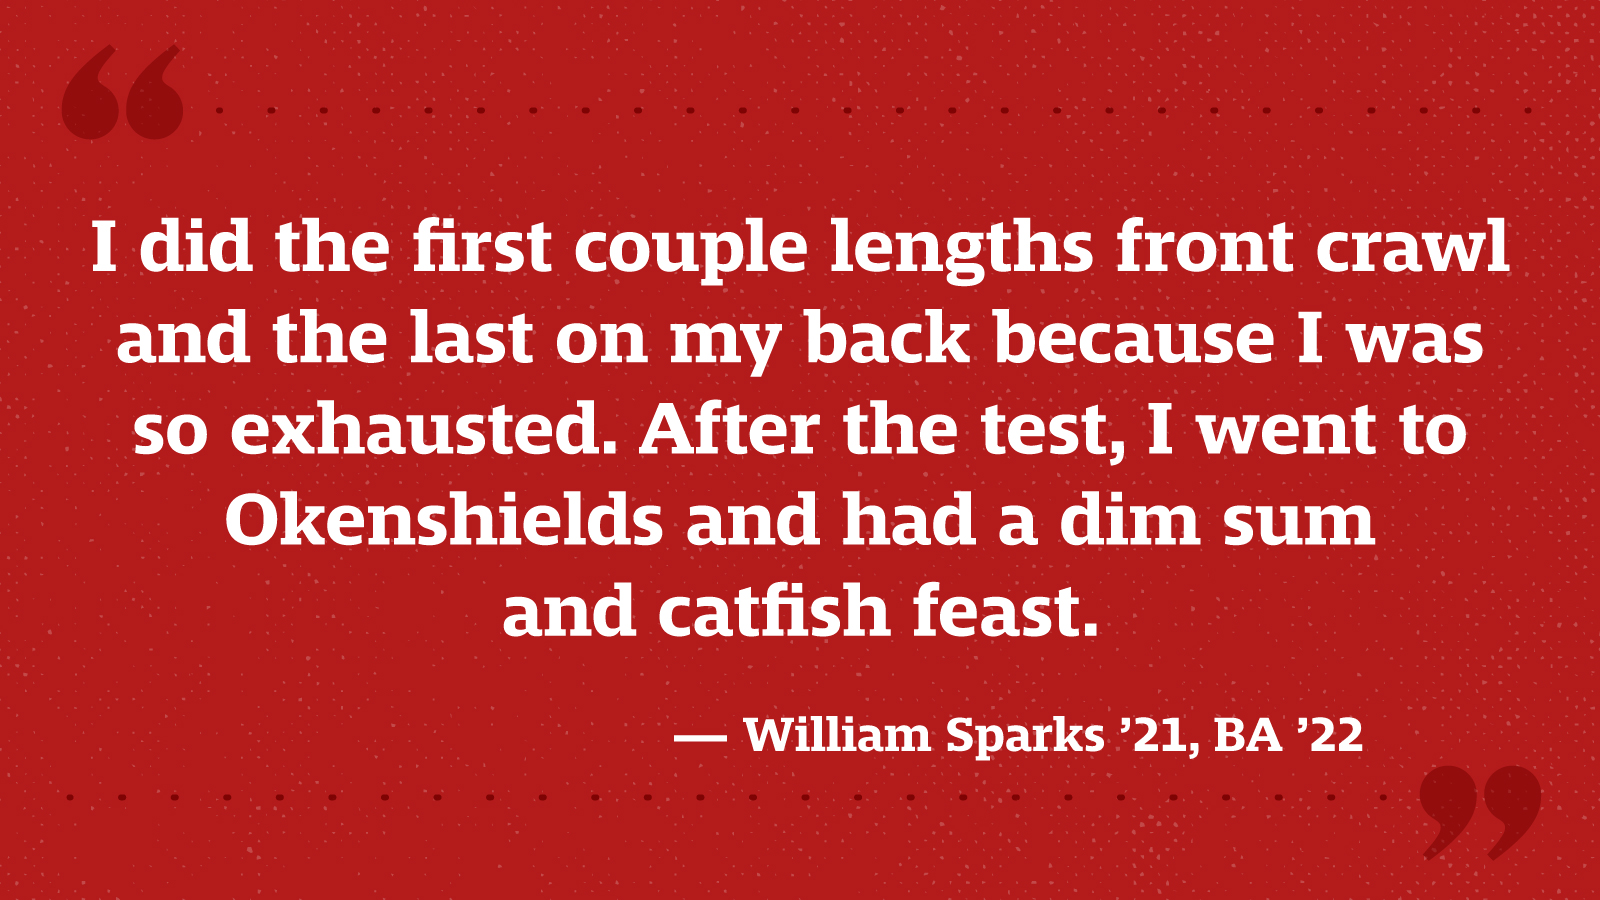 I did the first couple lengths front crawl and the last on my back because I was so exhausted. After the test, I went to Okenshields and had a dim sum and catfish feast. — William Sparks ’21, BA ’22